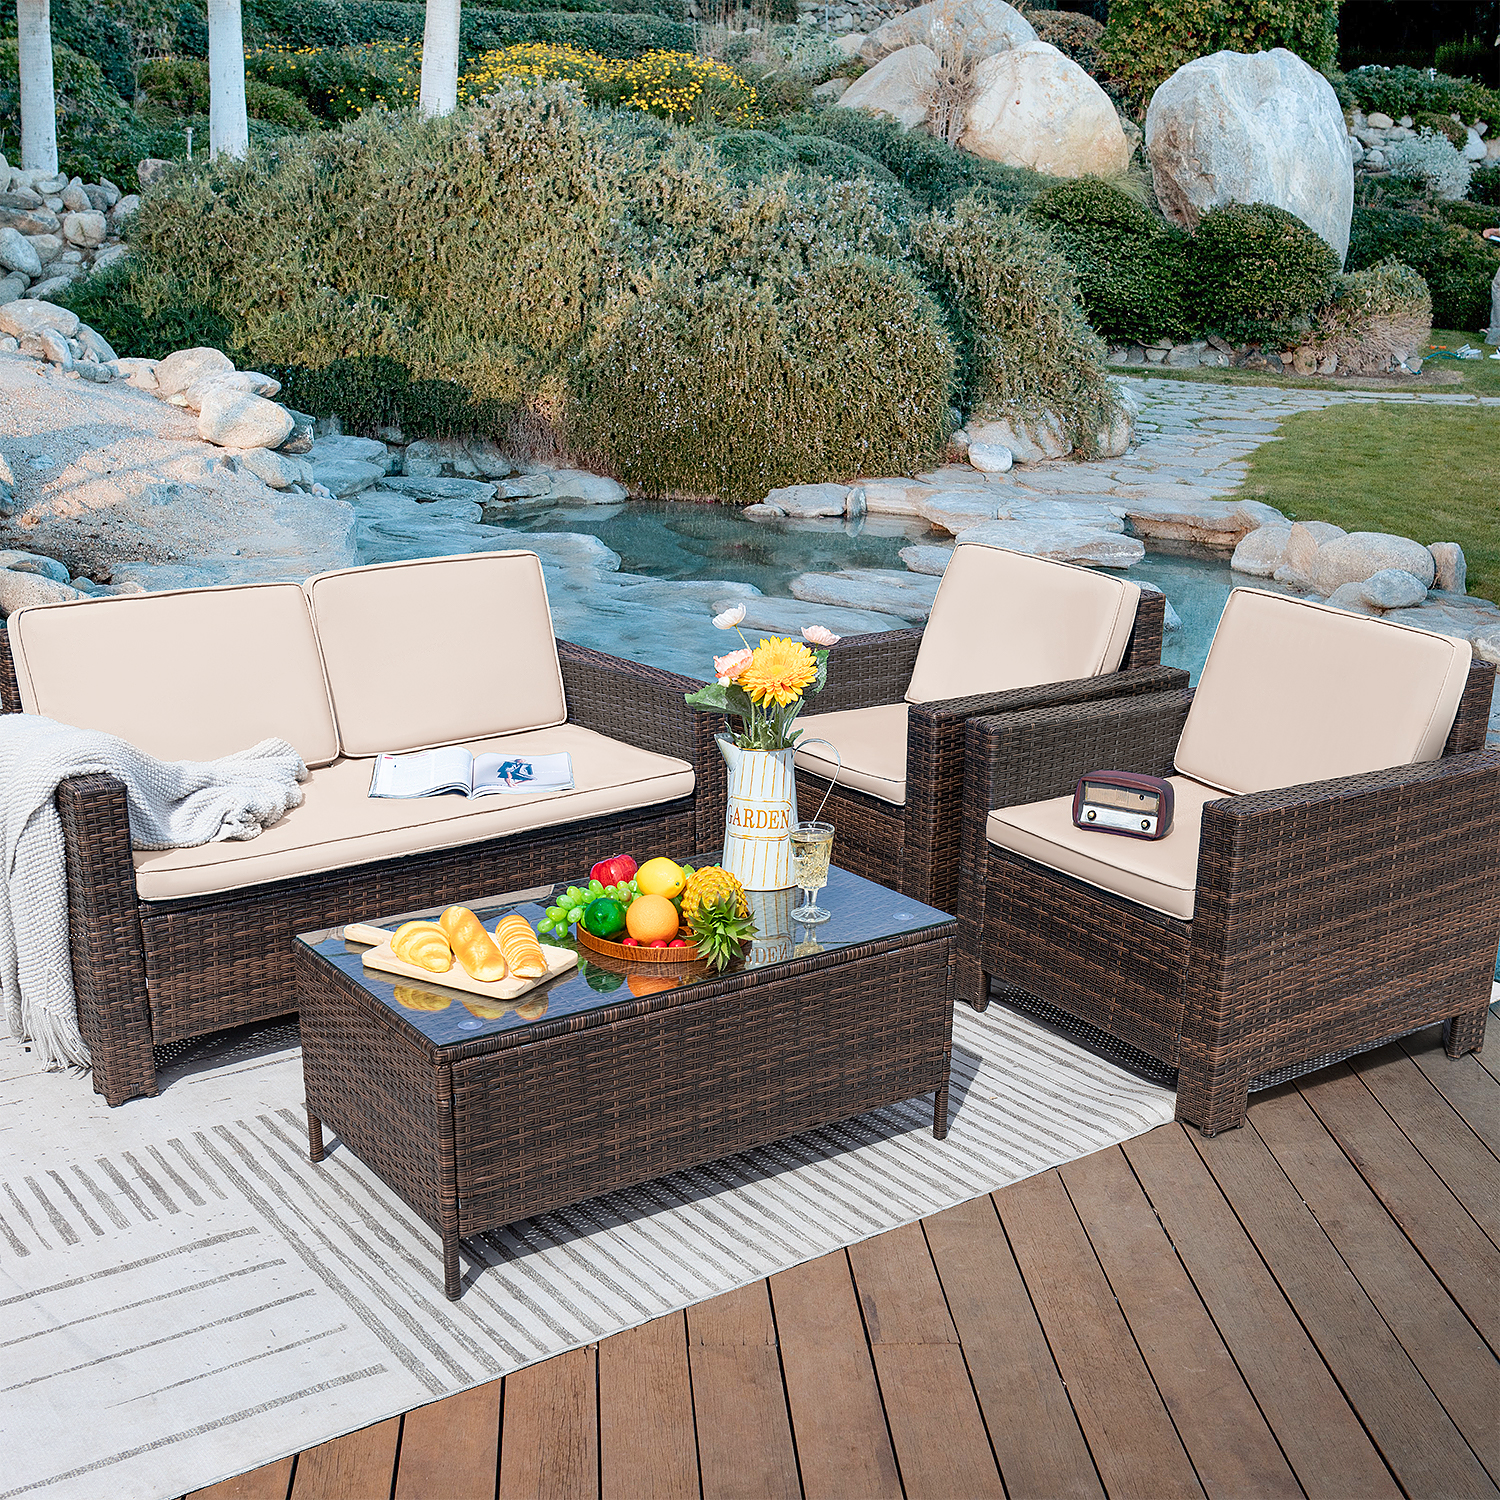 Lacoo 4 Pieces Patio Furniture Sets Rattan Chair Wicker Conversation Sofa Set Outdoor Backyard Porch Garden Poolside Balcony Use Furniture, Beige - image 1 of 7